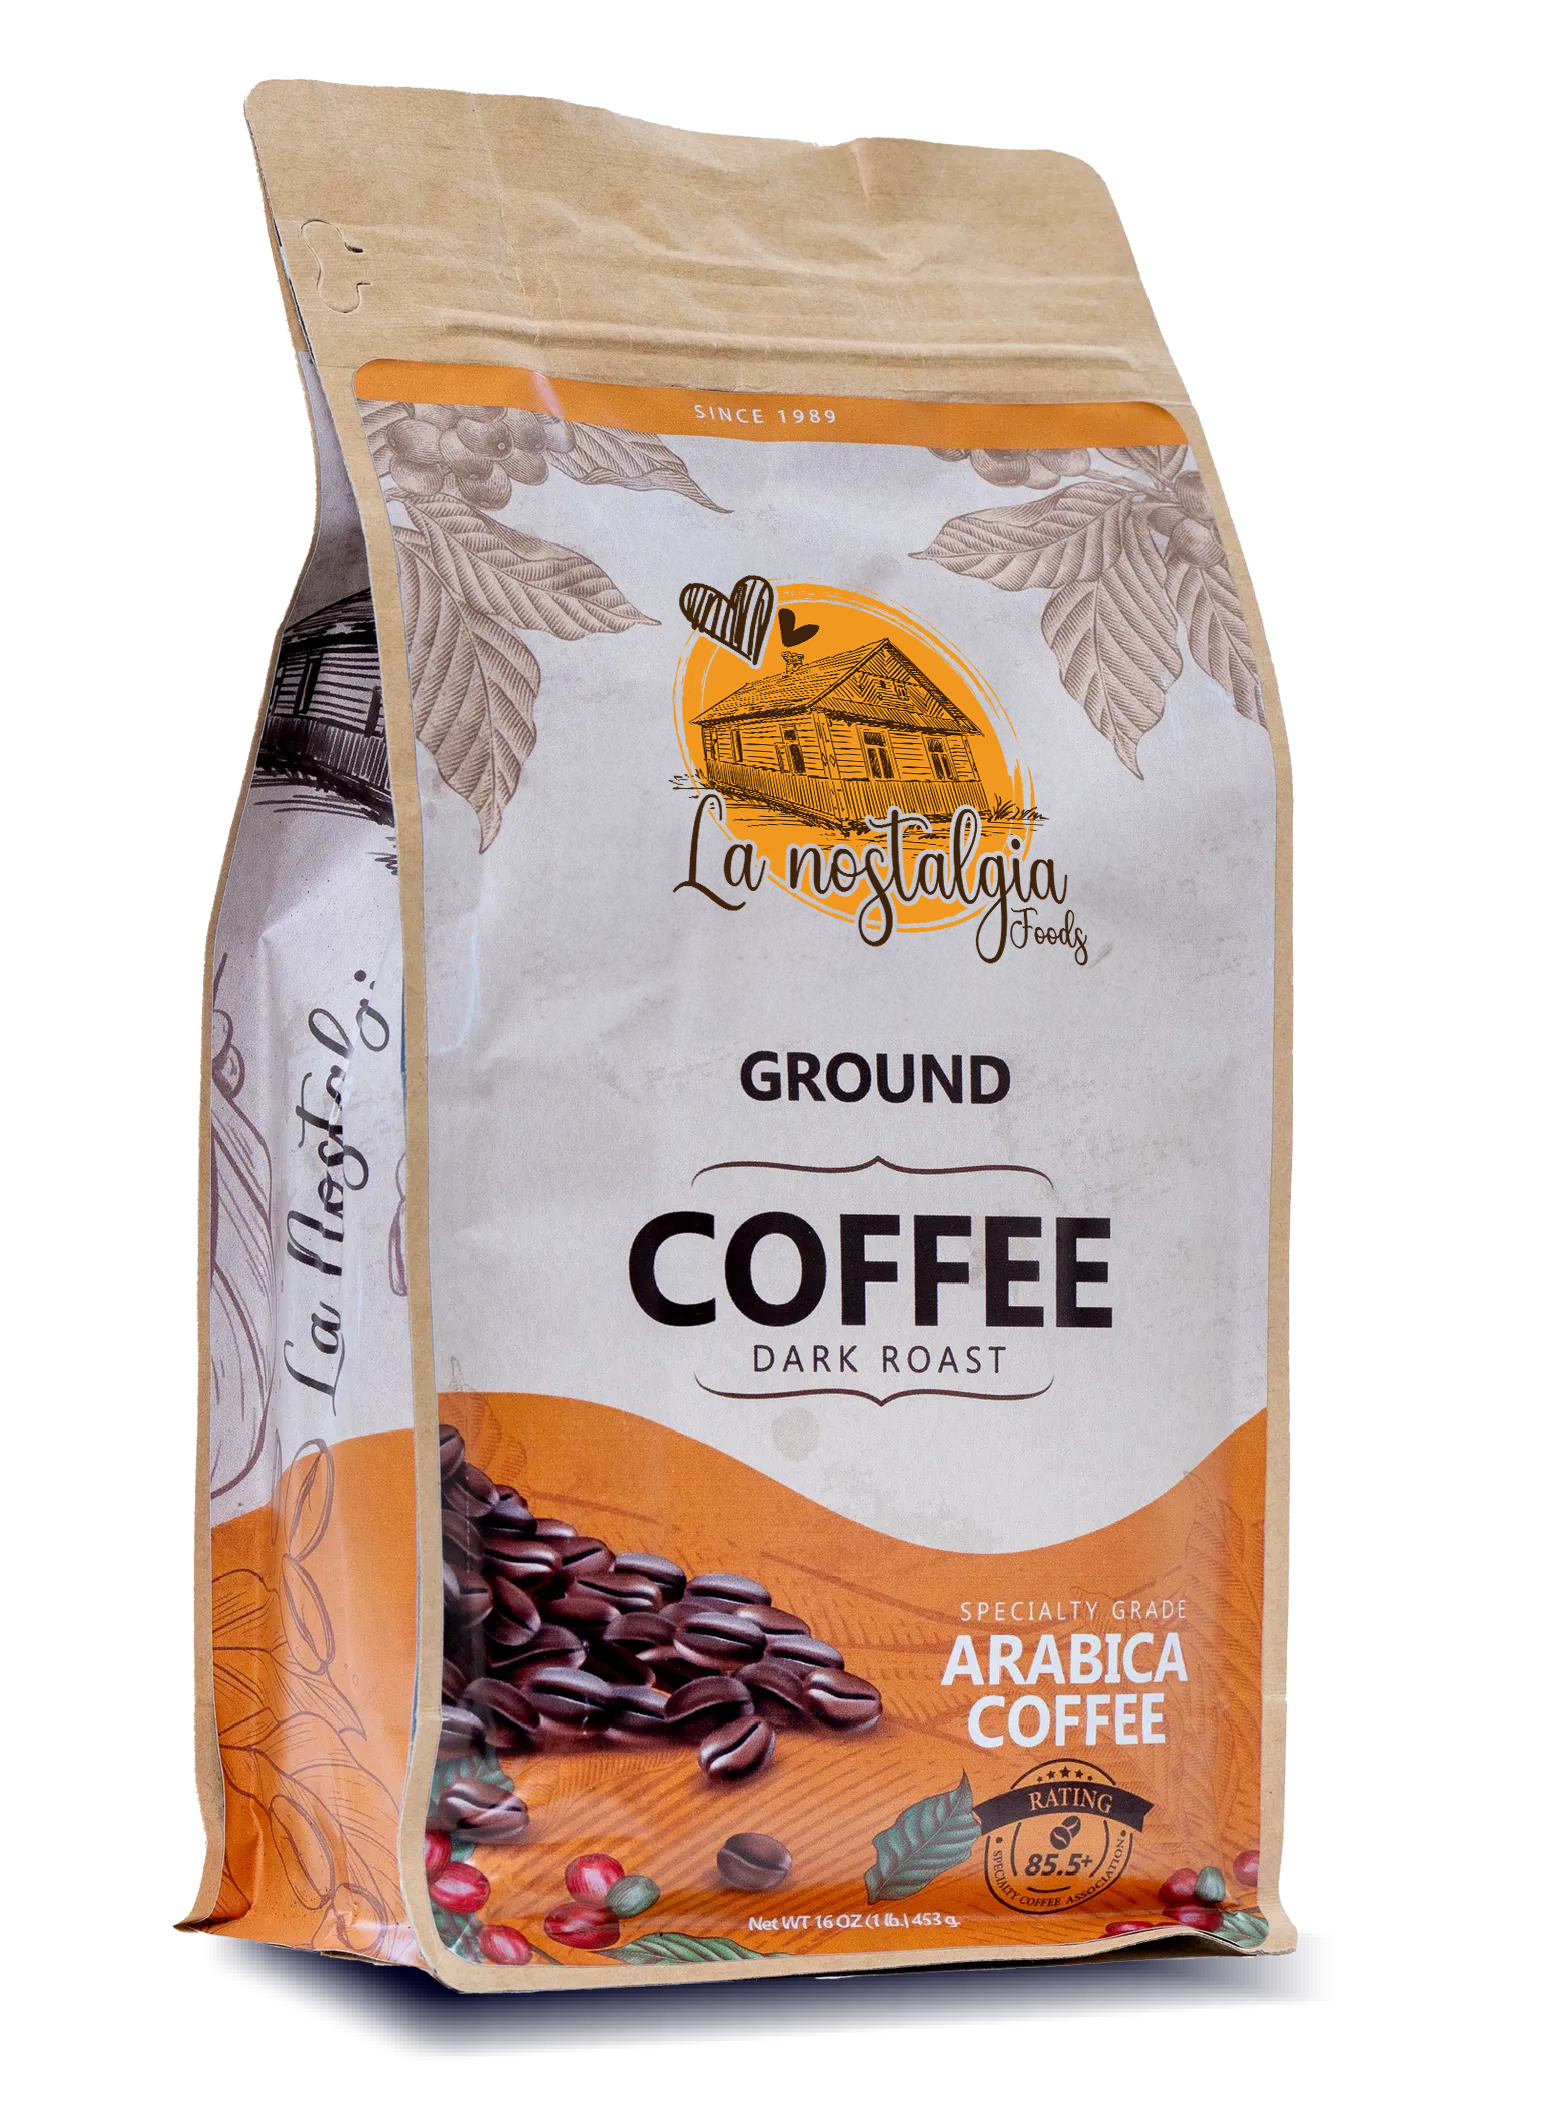 A bag of ground coffee is on a white background.